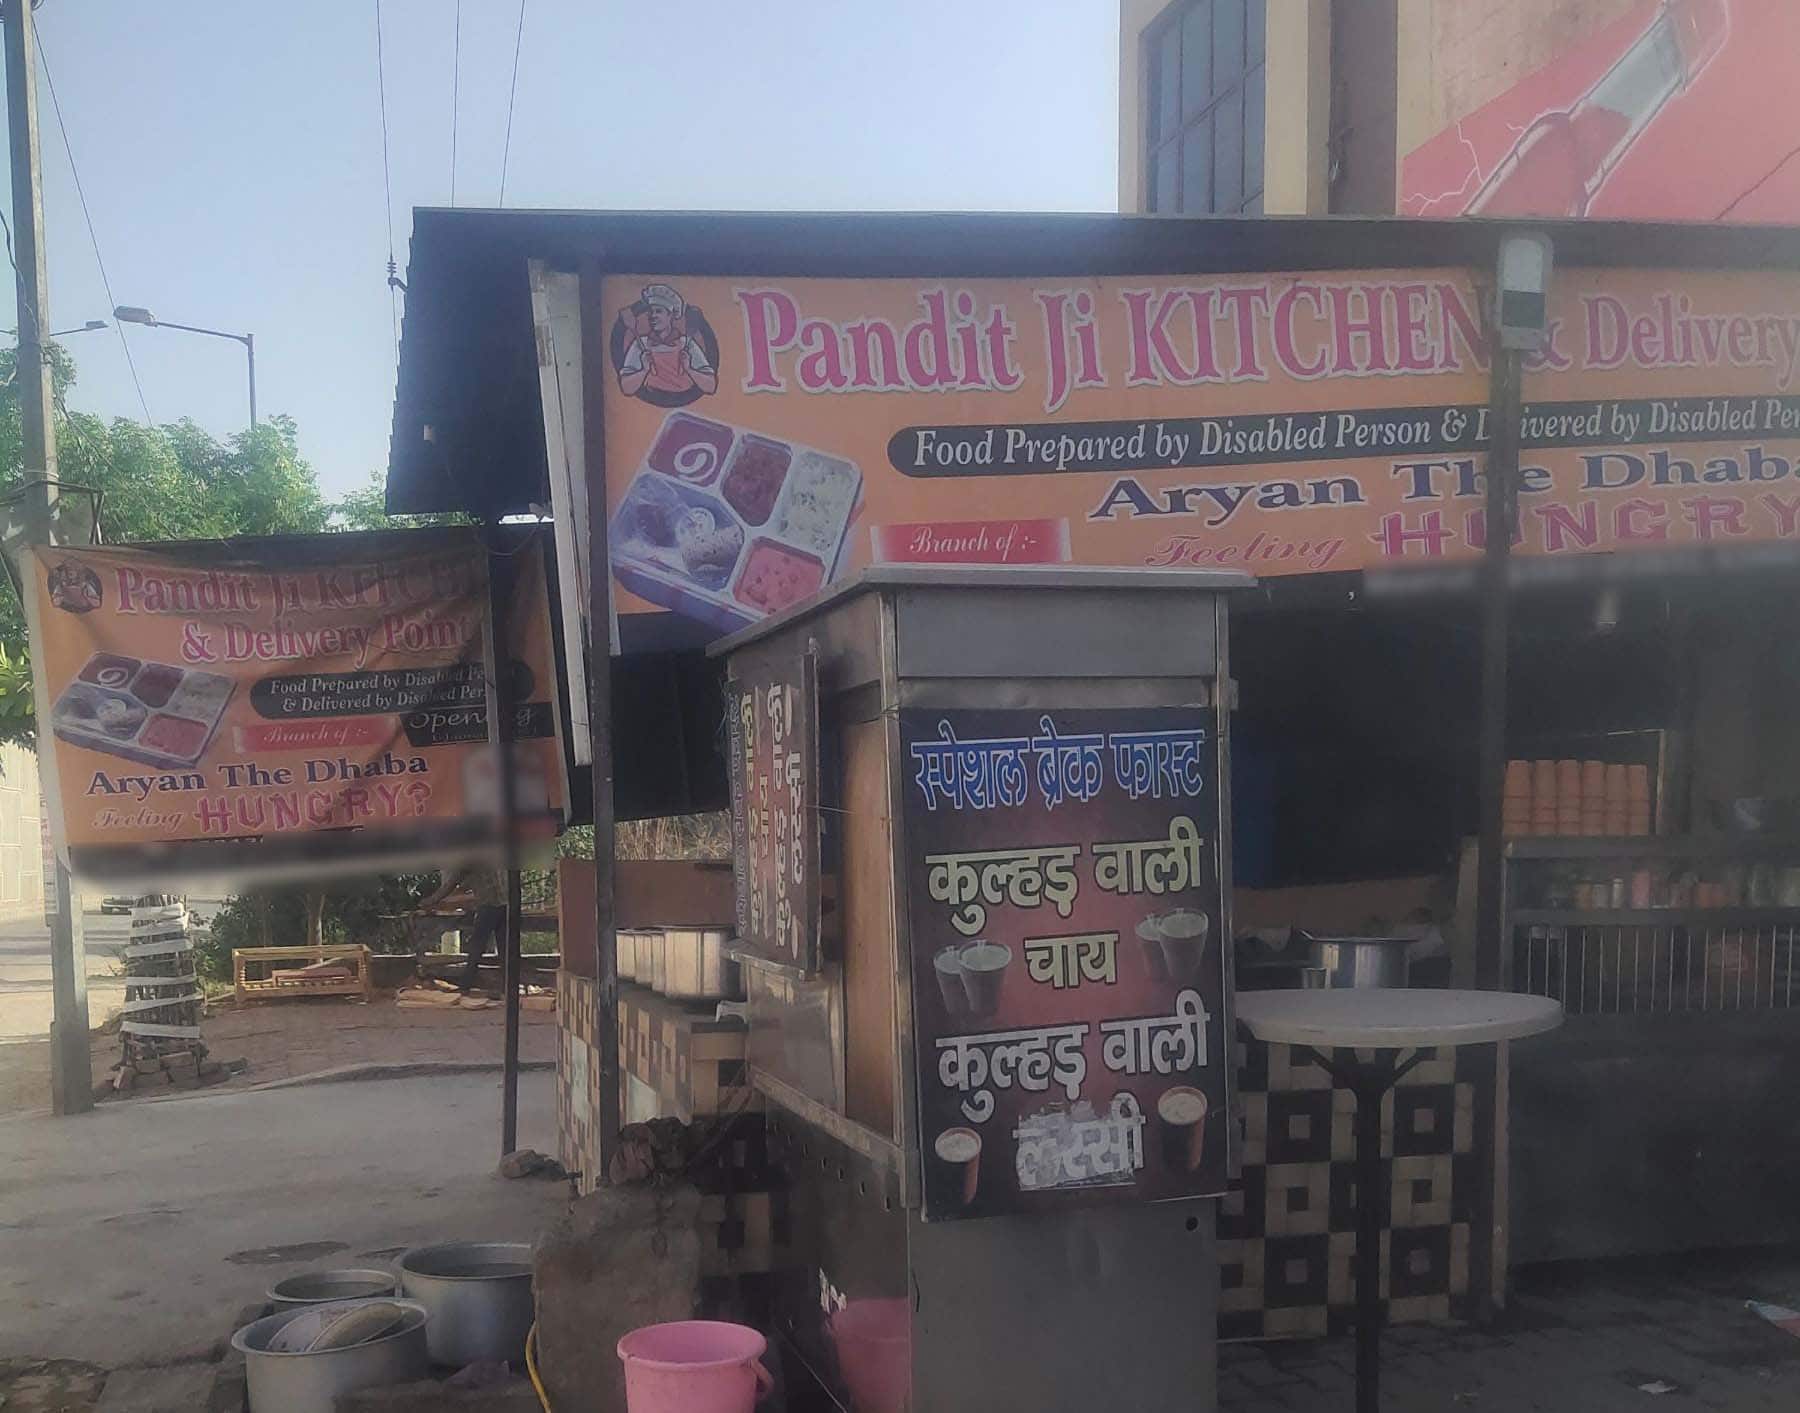 Pandit Ji Kitchen And Delivery Point, Partapur, Meerut | zomato